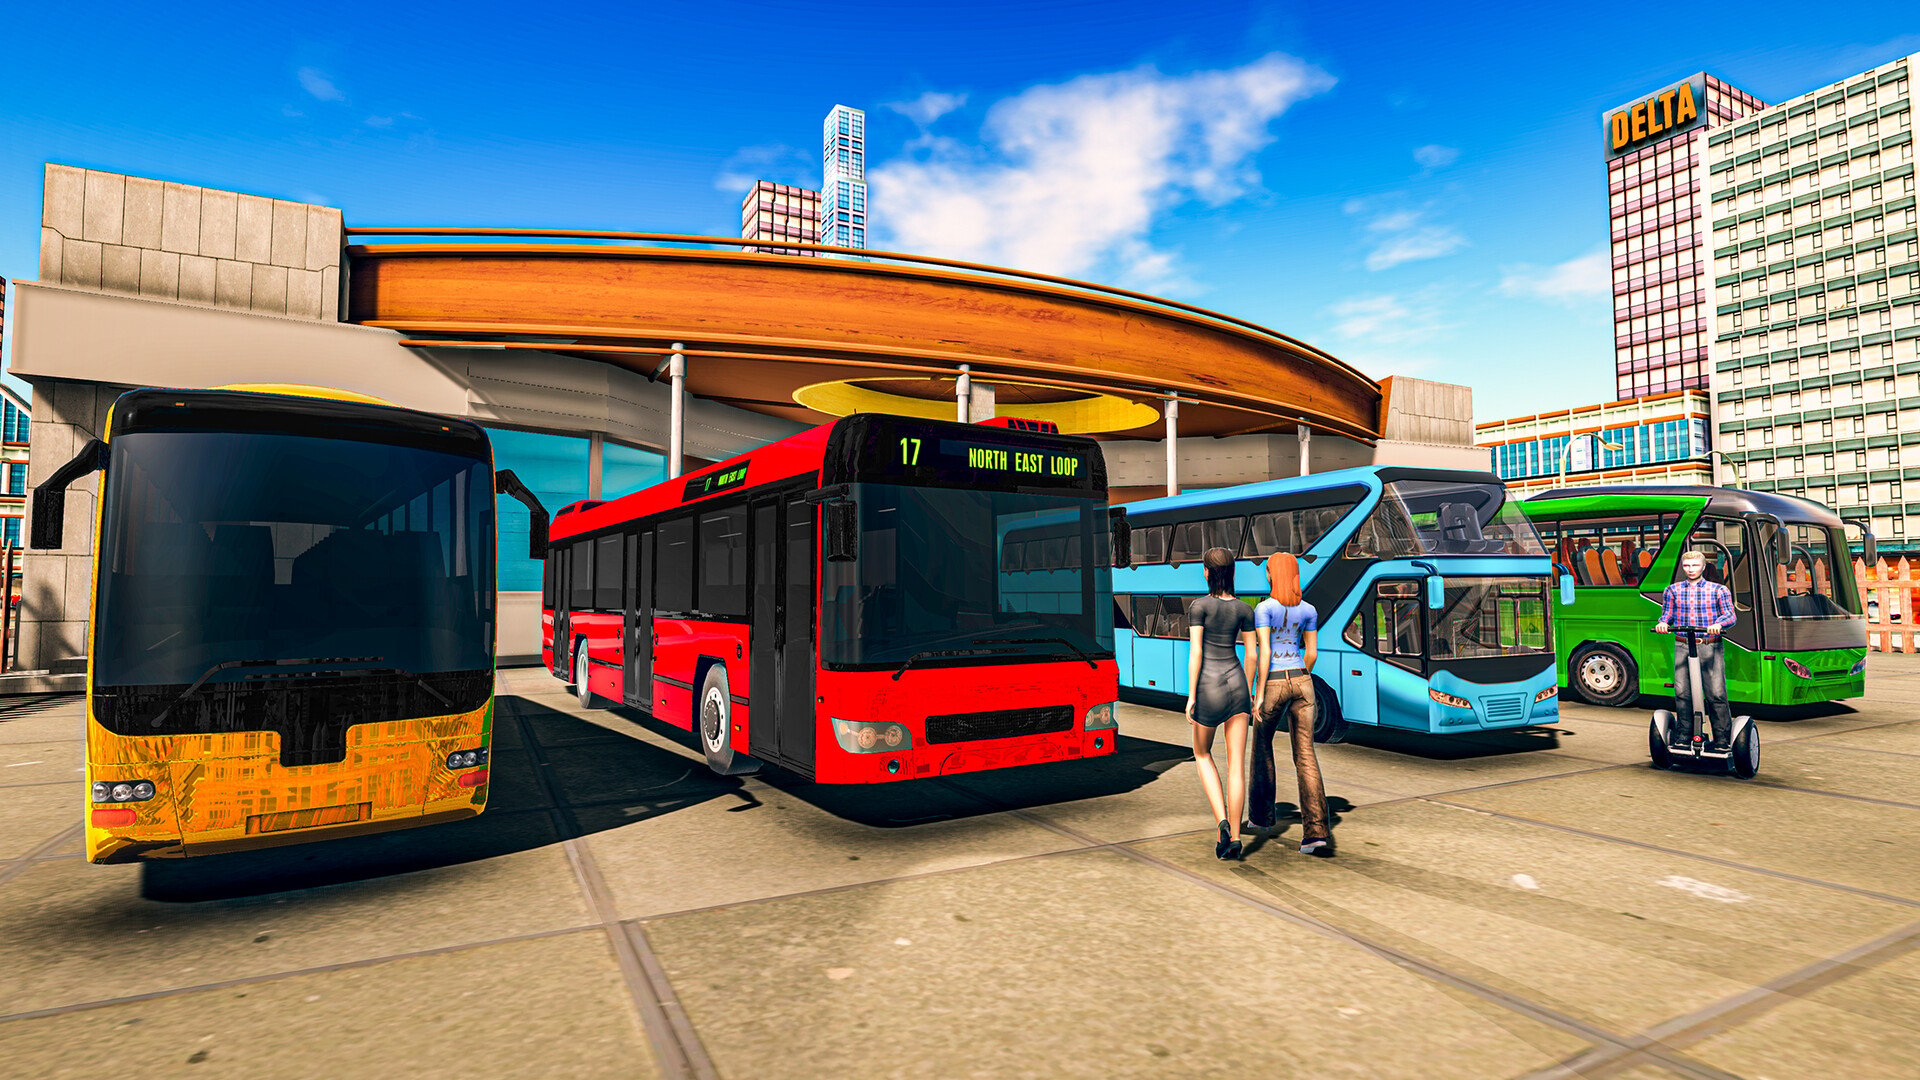 Bus Photos, Download The BEST Free Bus Stock Photos & HD Images